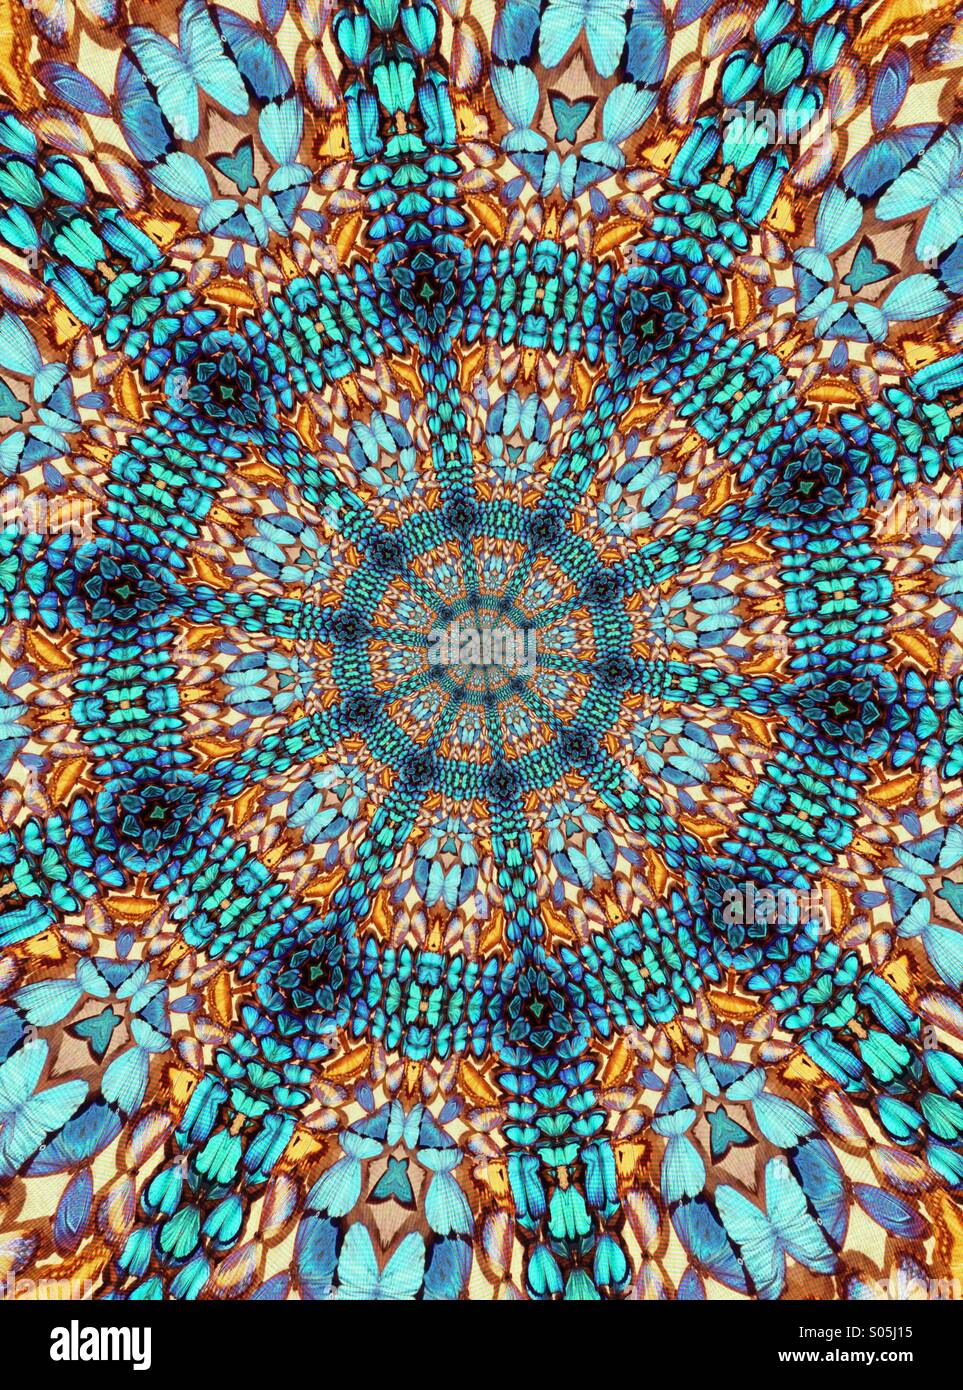 A kaleidoscopic image made from a picture of real butterflies Stock Photo